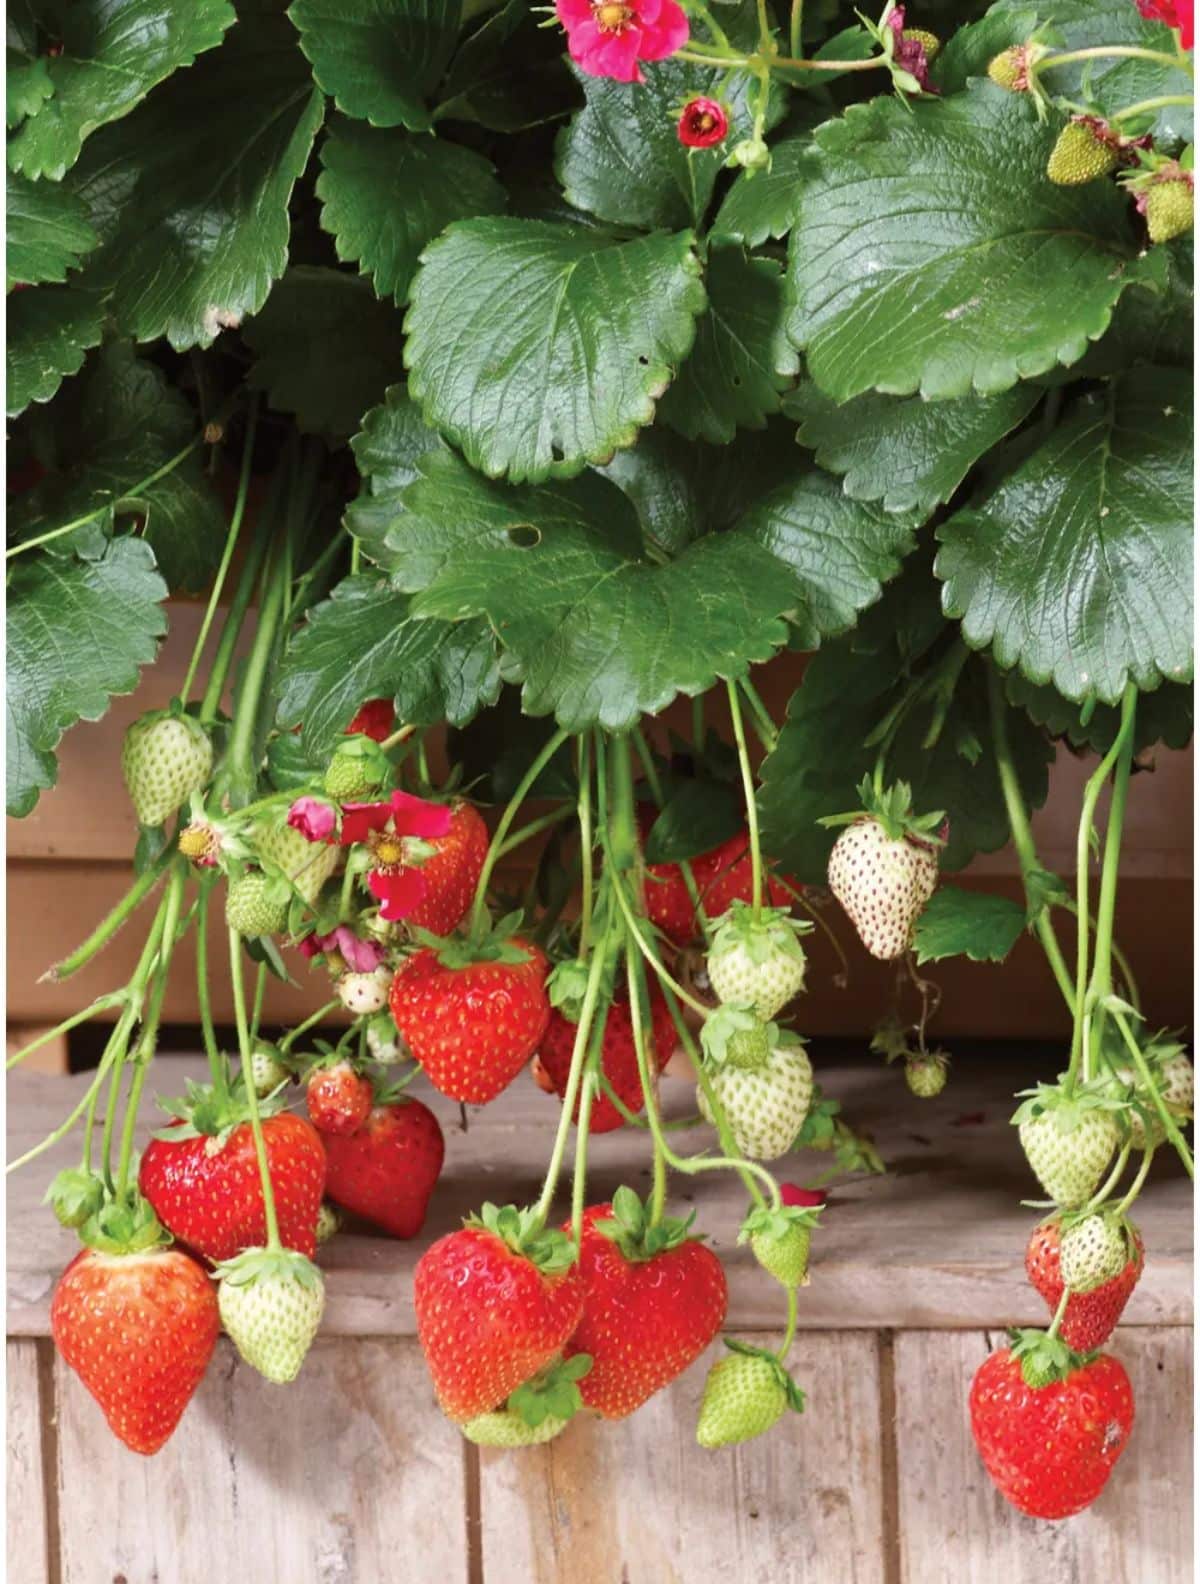 Summer Breeze Strawberry plant with ripe and unripe fruits gorwing in a hanging basket..